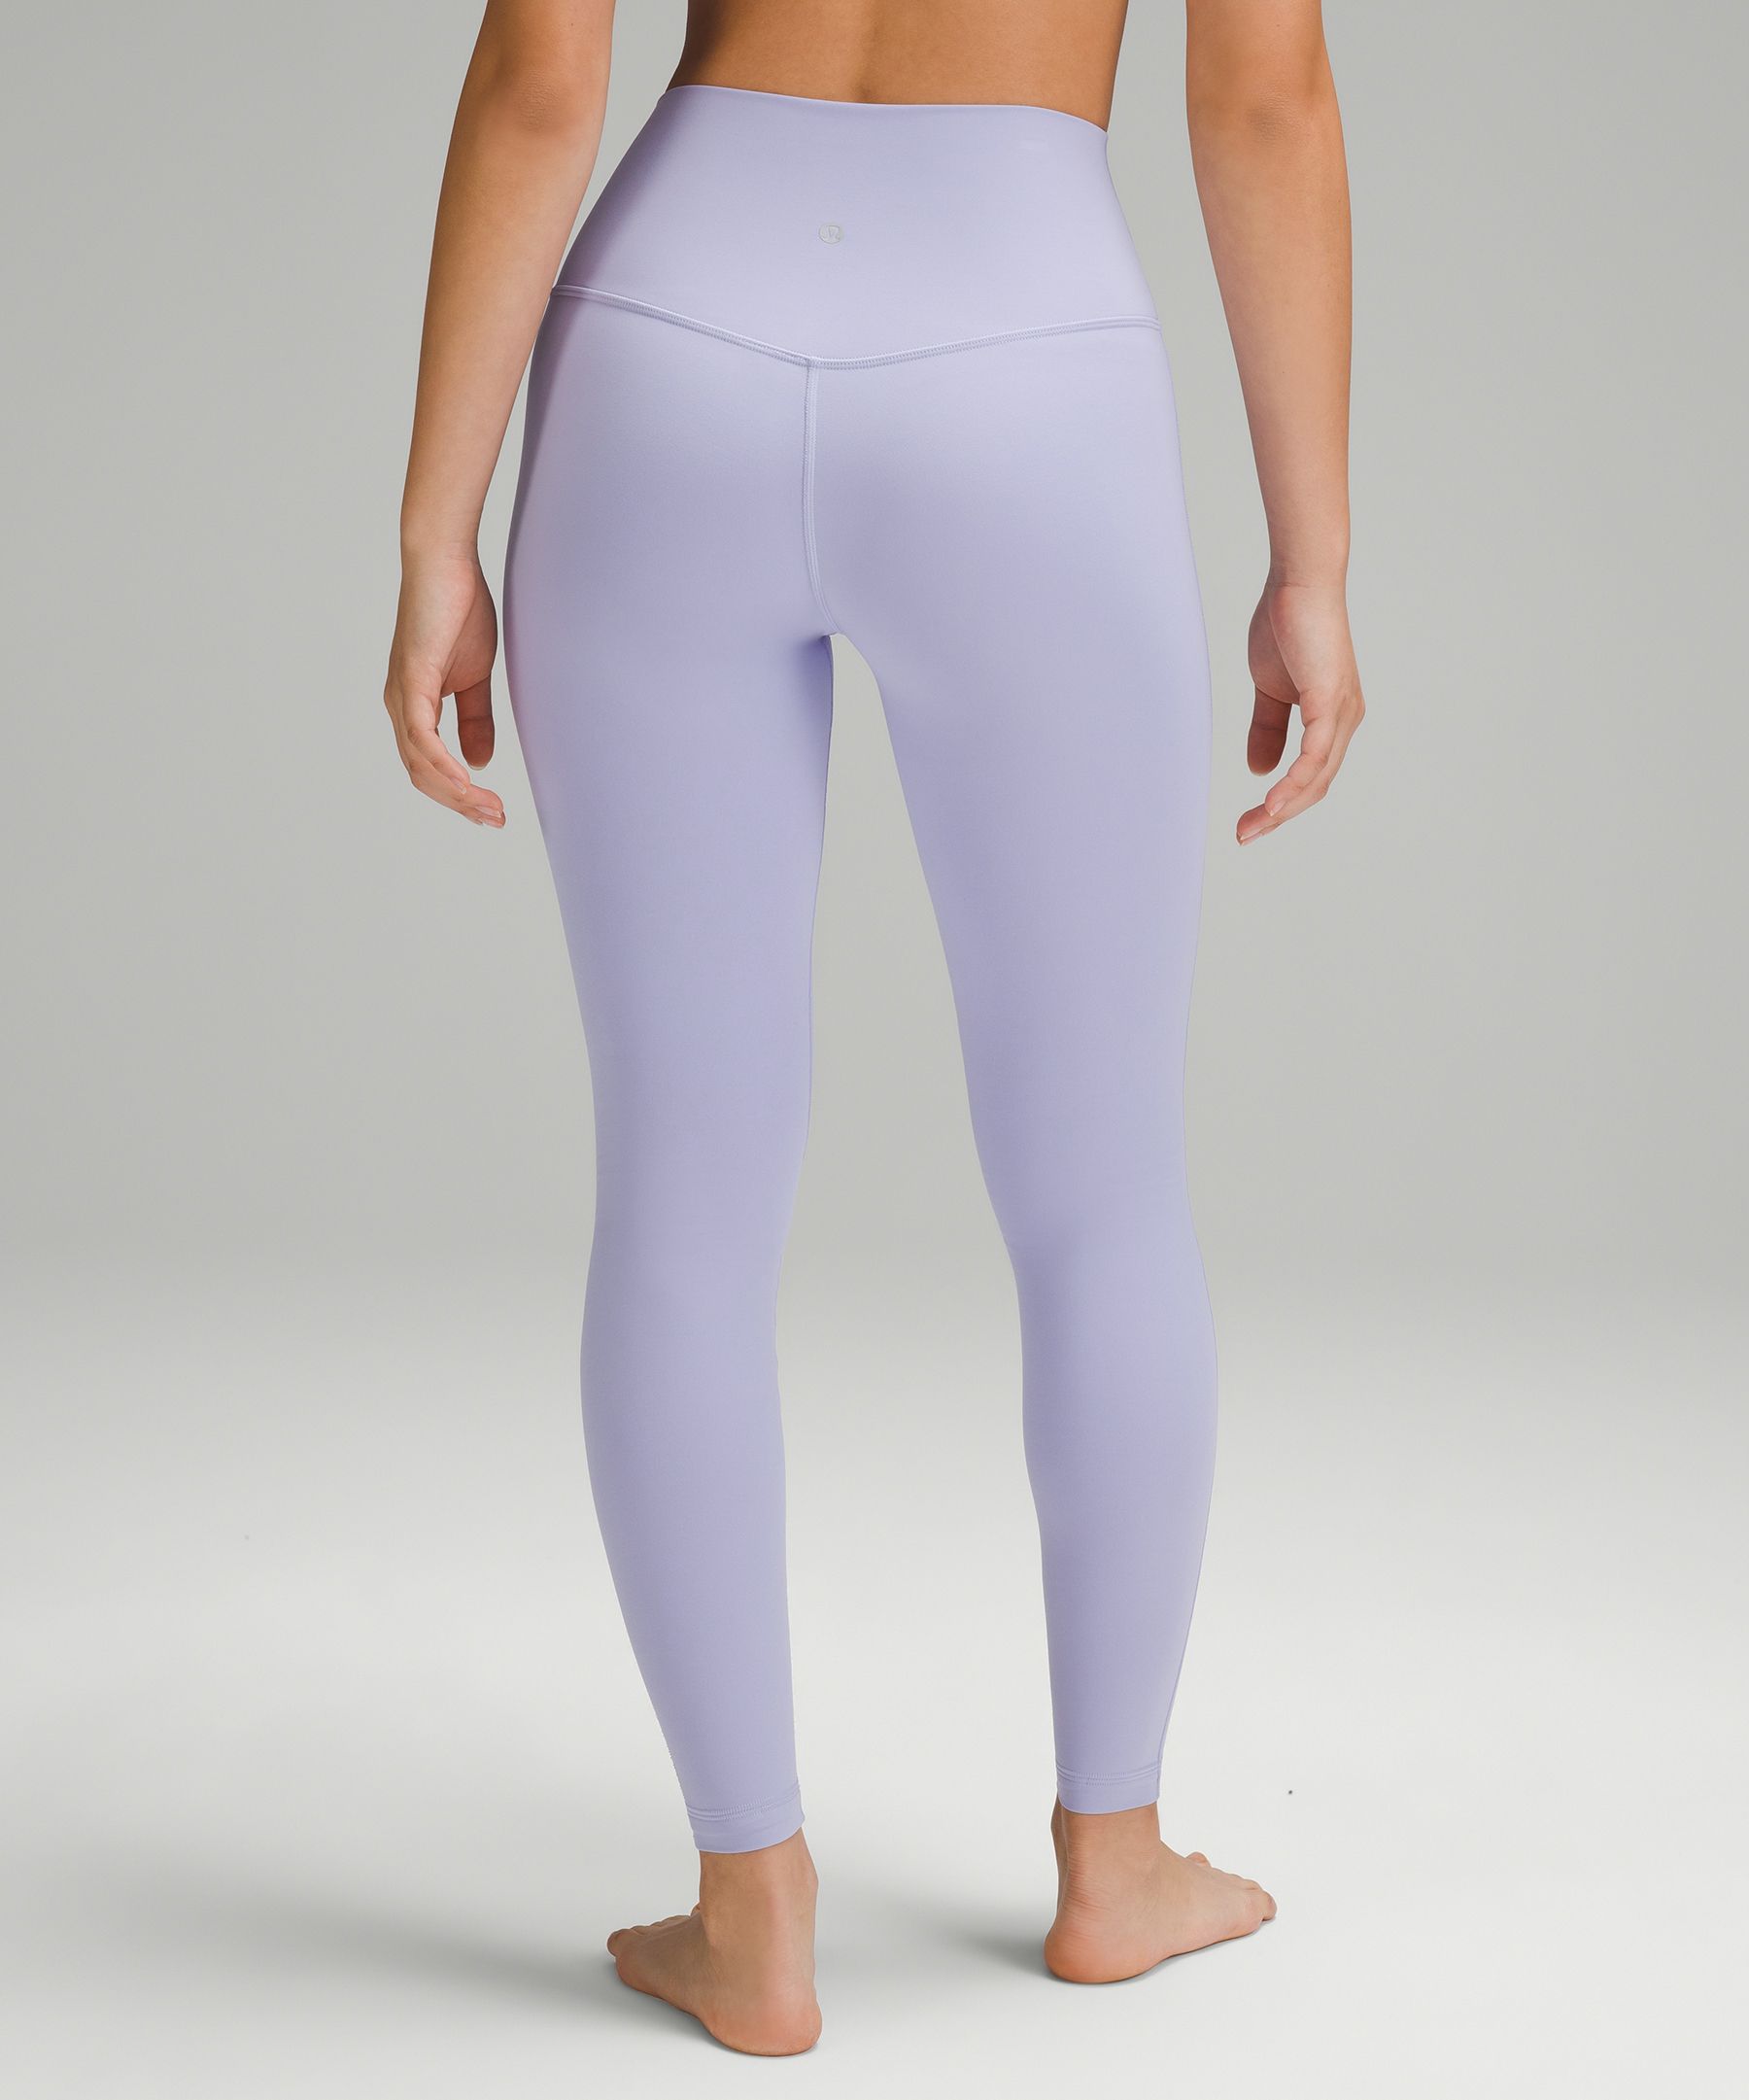 Lululemon Align High-Rise Pant 28 in Wisteria Purple - Size 4 – Chic  Boutique Consignments